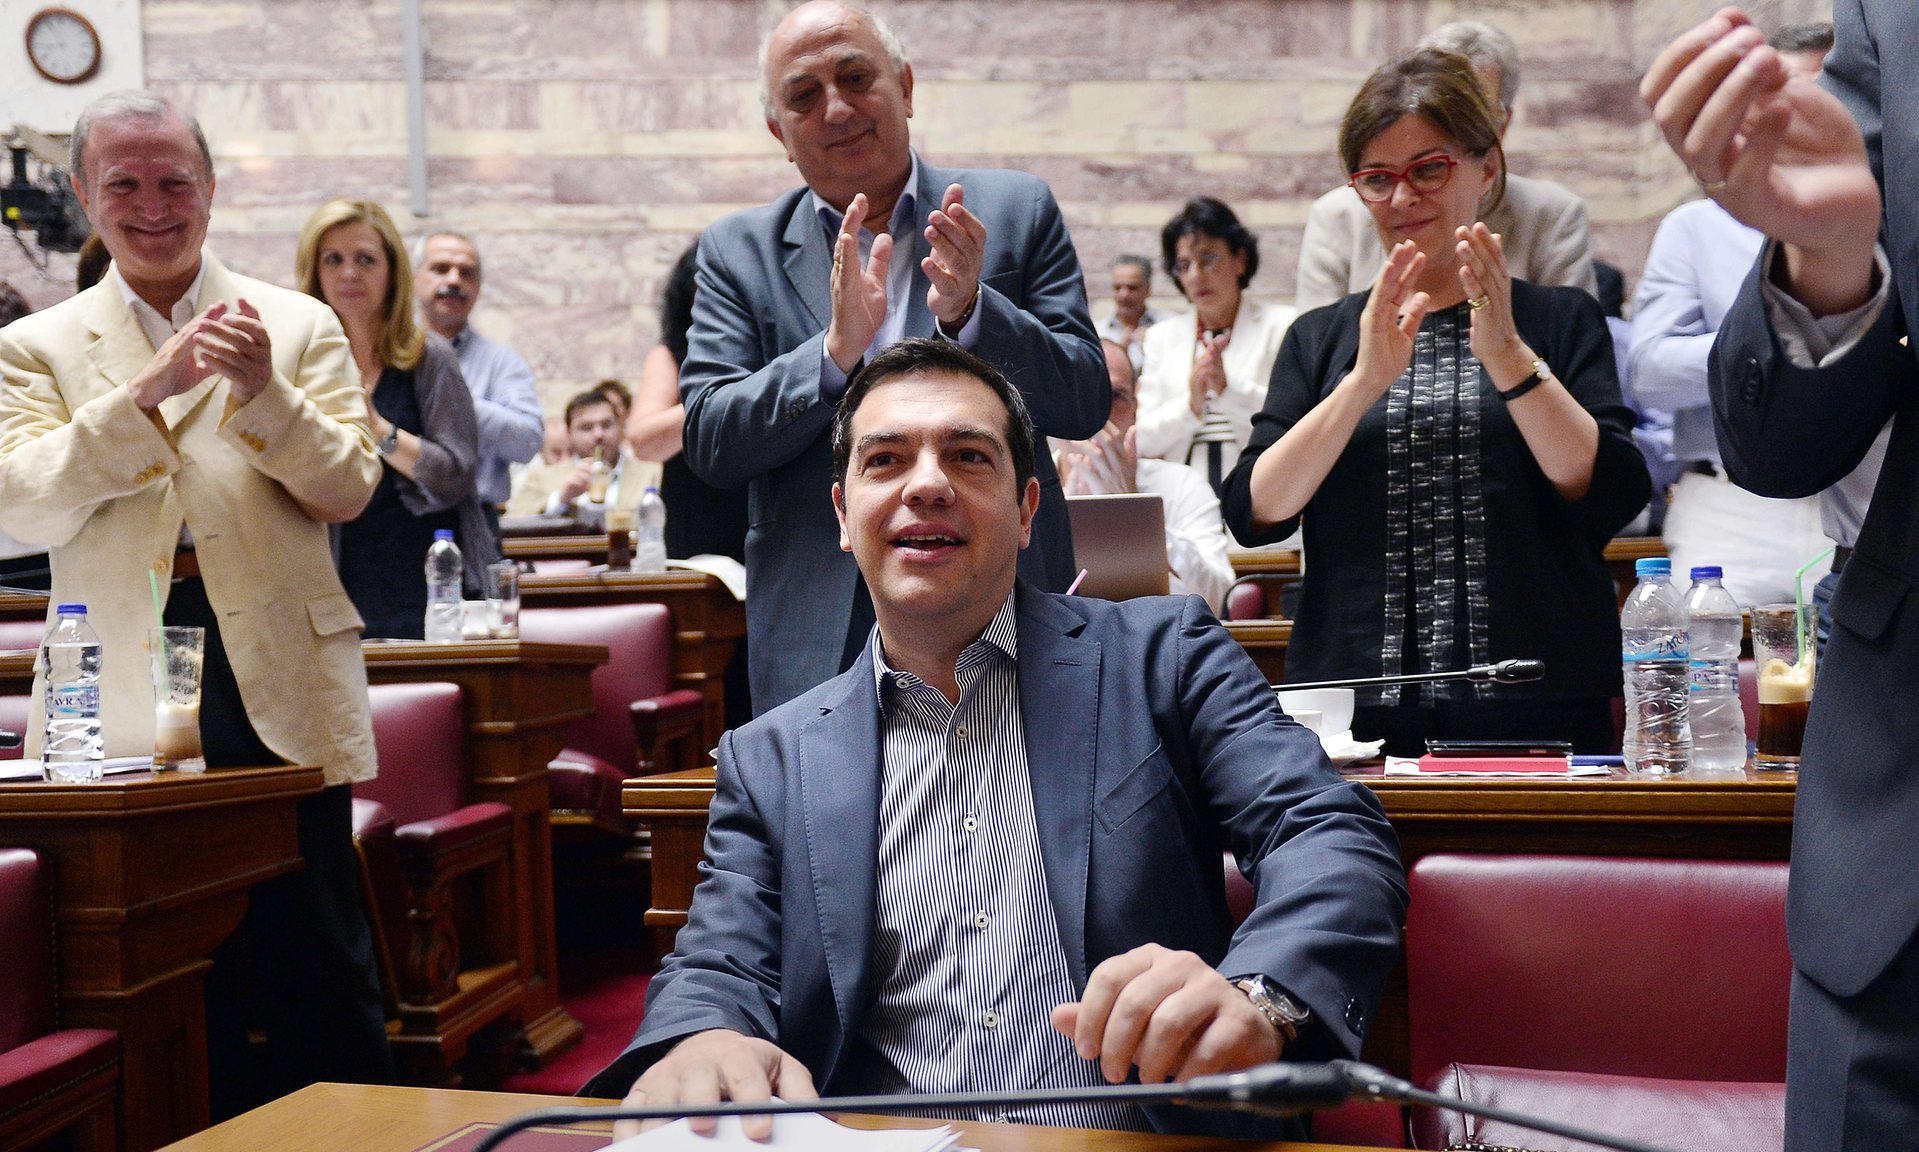 Greek prime minister Alexis Tsipras is applauded by lawmakers before addressing his parliamentary group meeting in Athens on July 10, 2015. Photograph: Louisa Gouliamaki/AFP/Getty Images